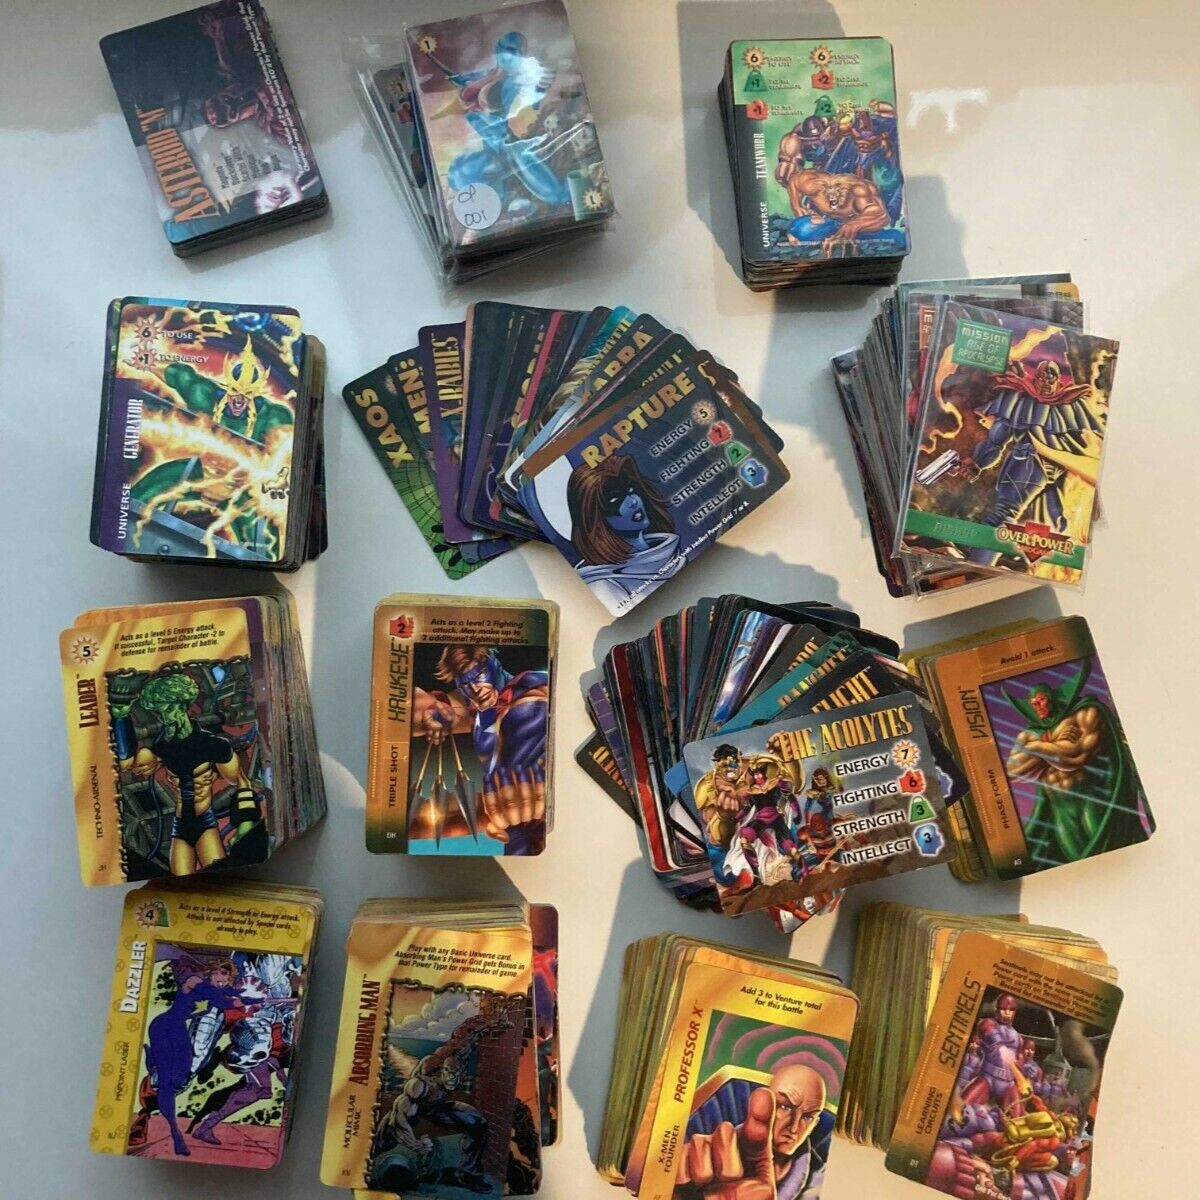 Marvel DC Image OverPower card lot - 1,490 cards. No duplicates. $900+ value